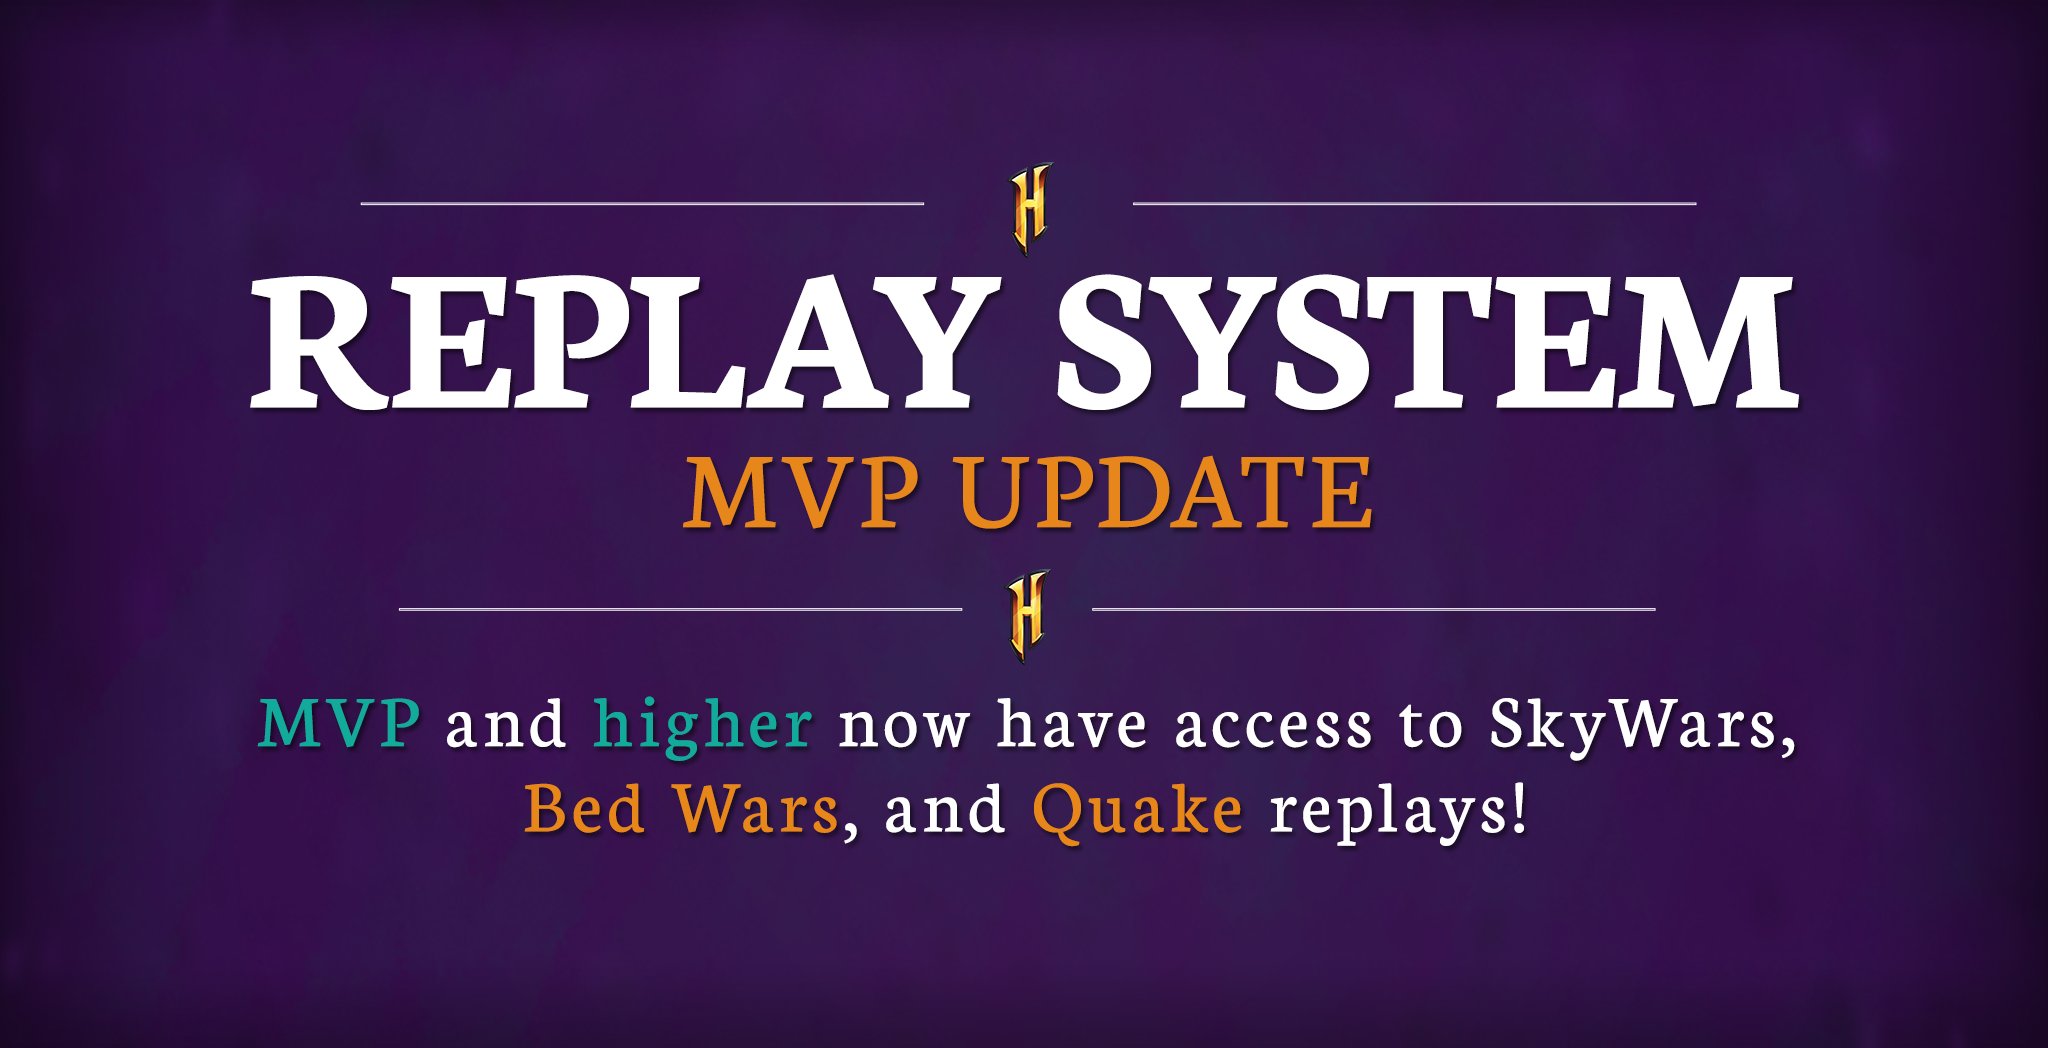 Hypixel Server Wait Rewind That Replay System Is Now In Bed Wars And Quake And It S Available To Mvp Or Higher All They Have To Do Is Use Games To